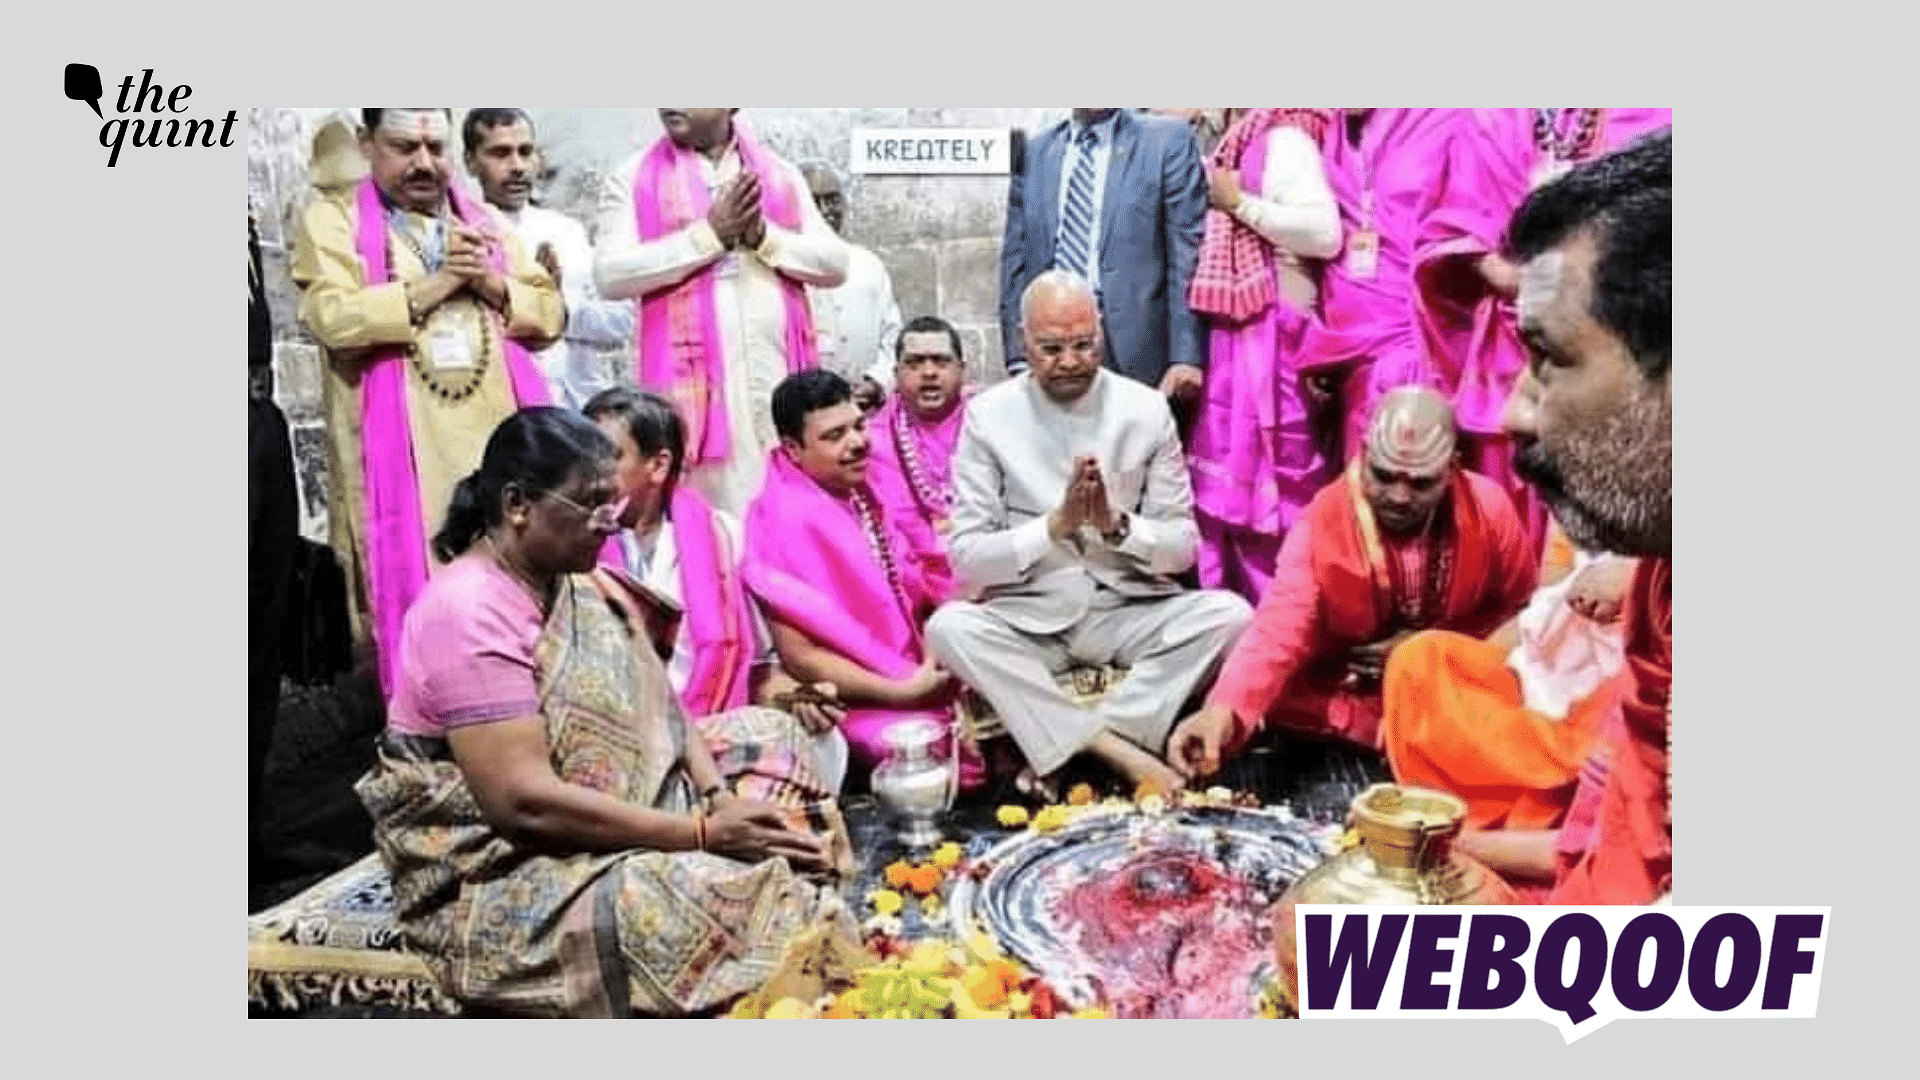 <div class="paragraphs"><p>Facebook: The claim states that Kovind performed a 'Vedic ritual' with Murmu before handing down the presidency to her.</p></div>